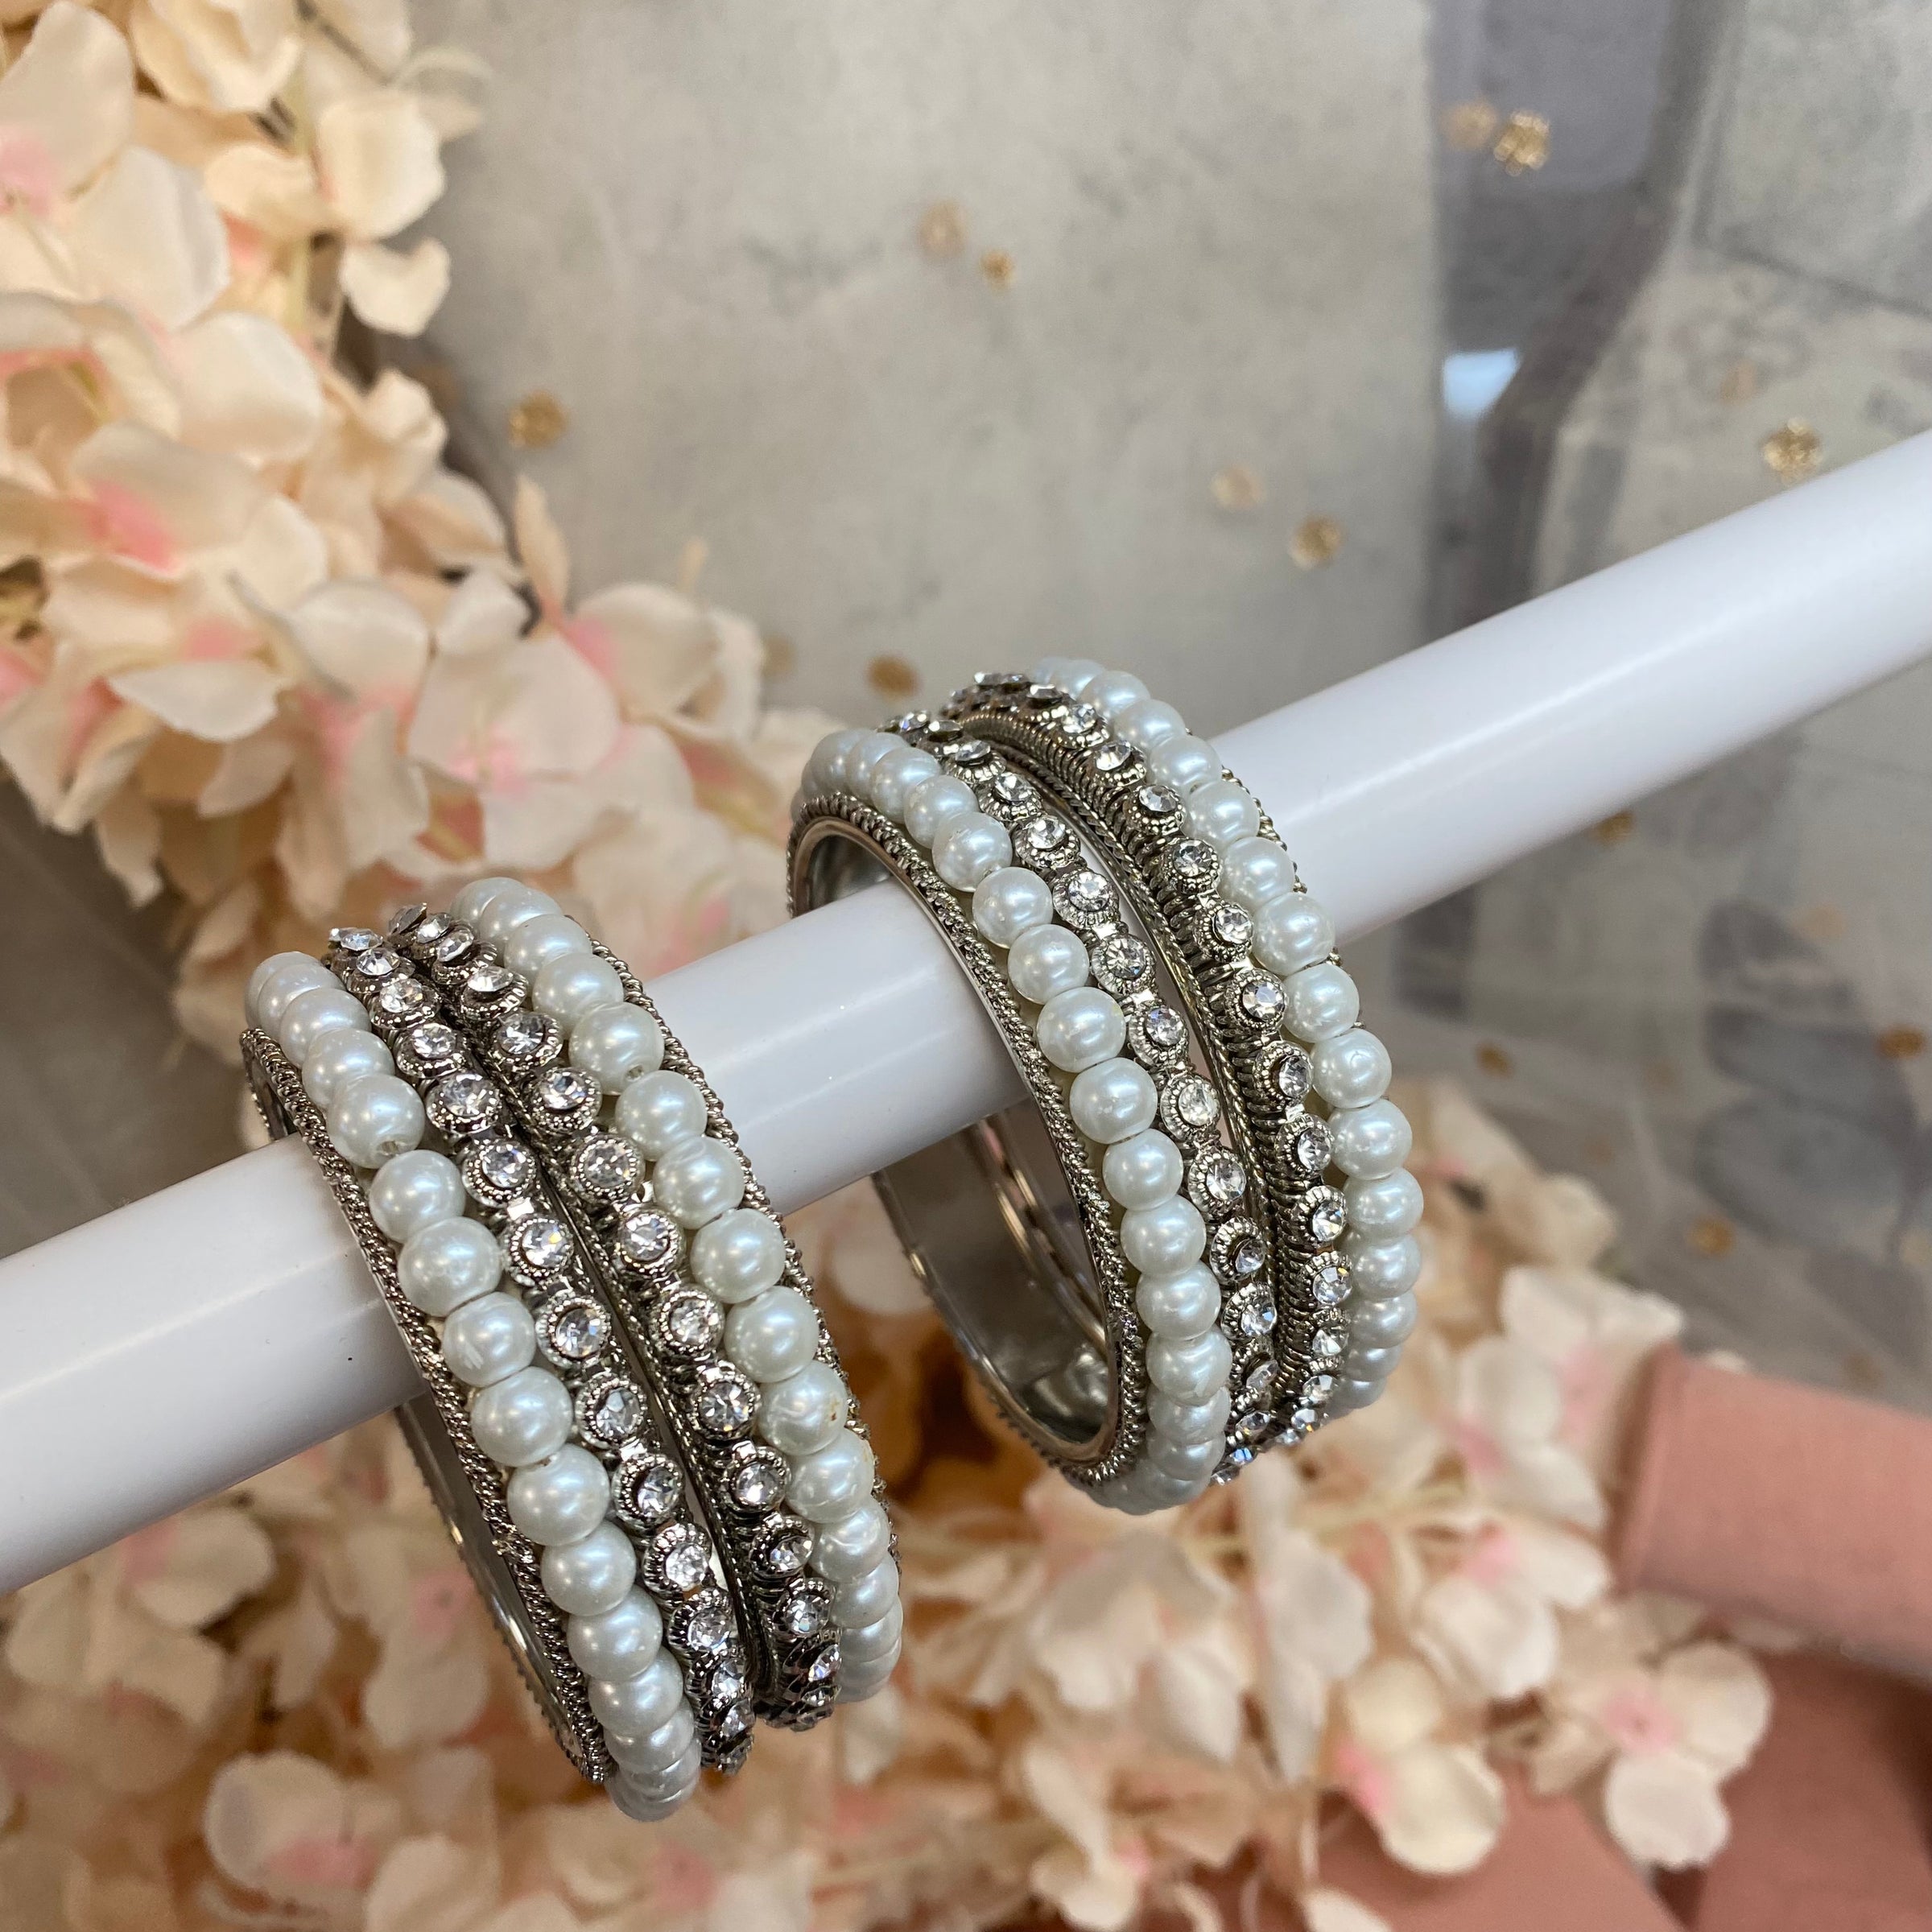 Thick Pearl and Silver Stone End bangles